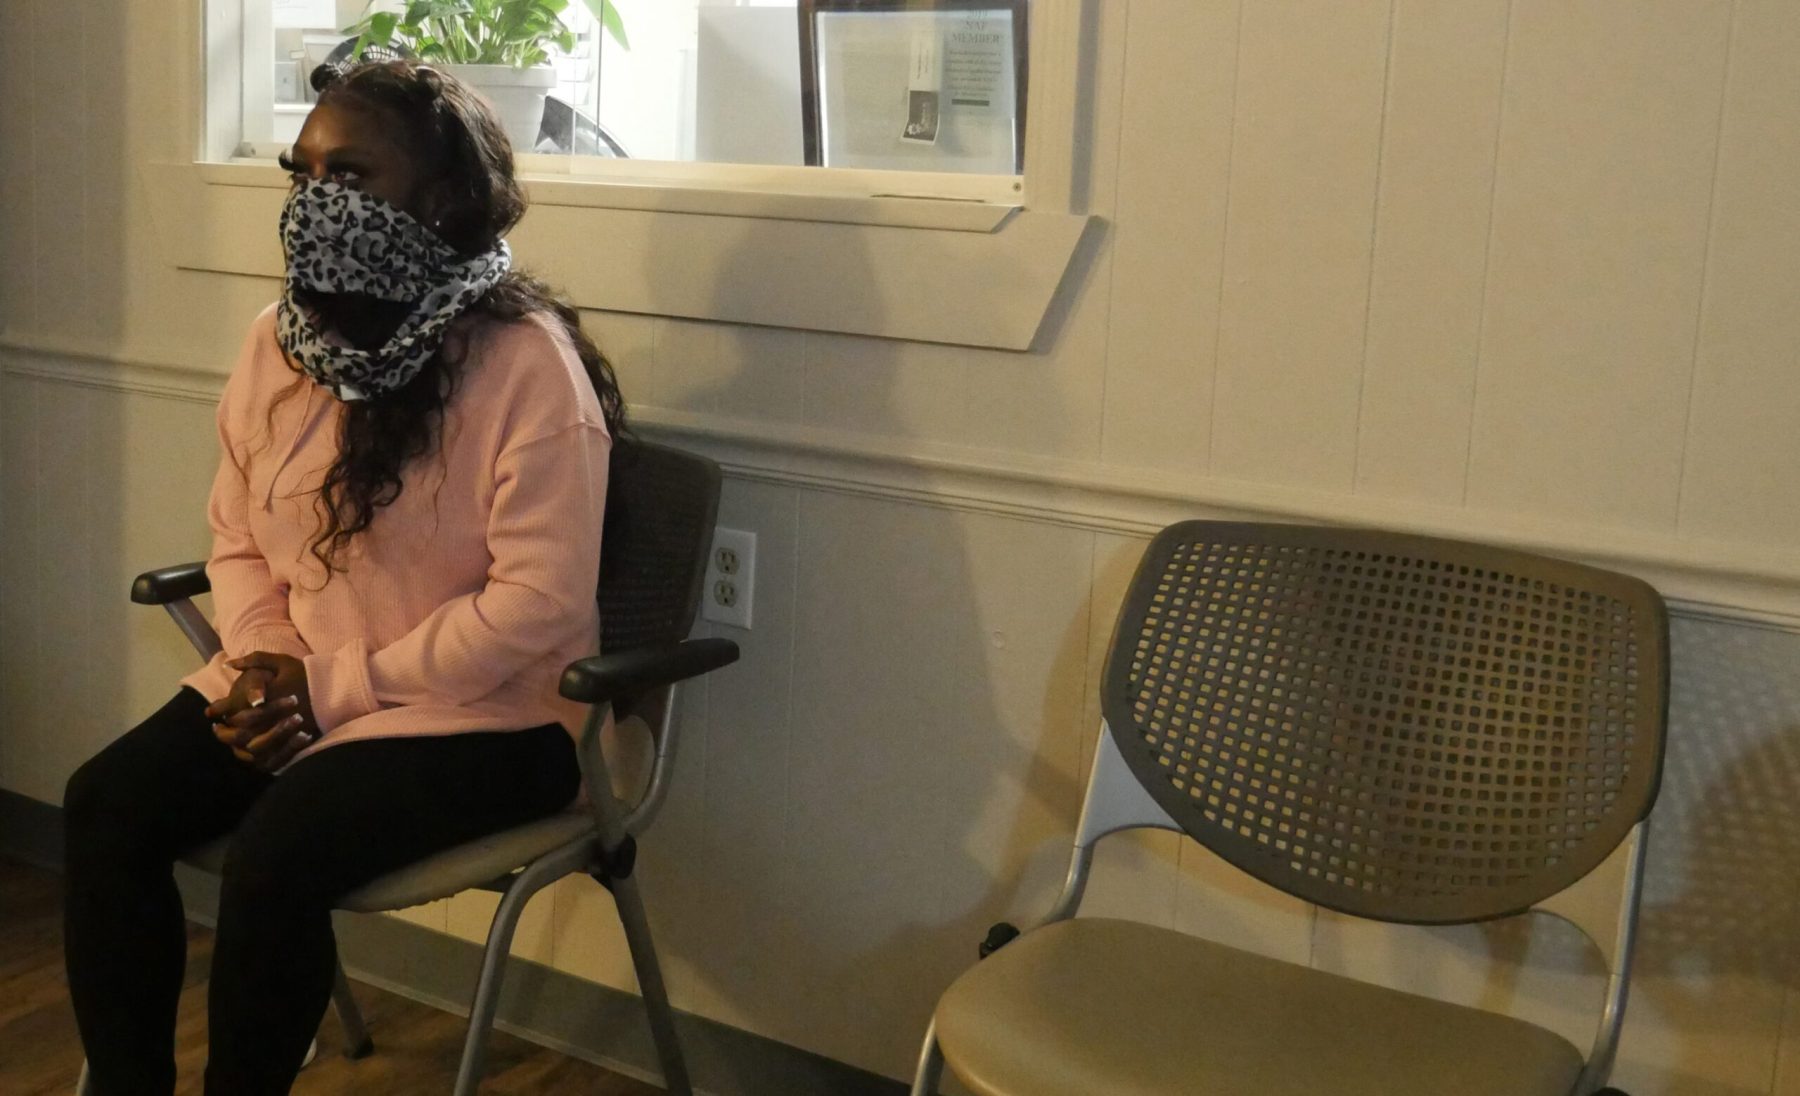 A woman sits in a chair in an abortion clinic waiting room.